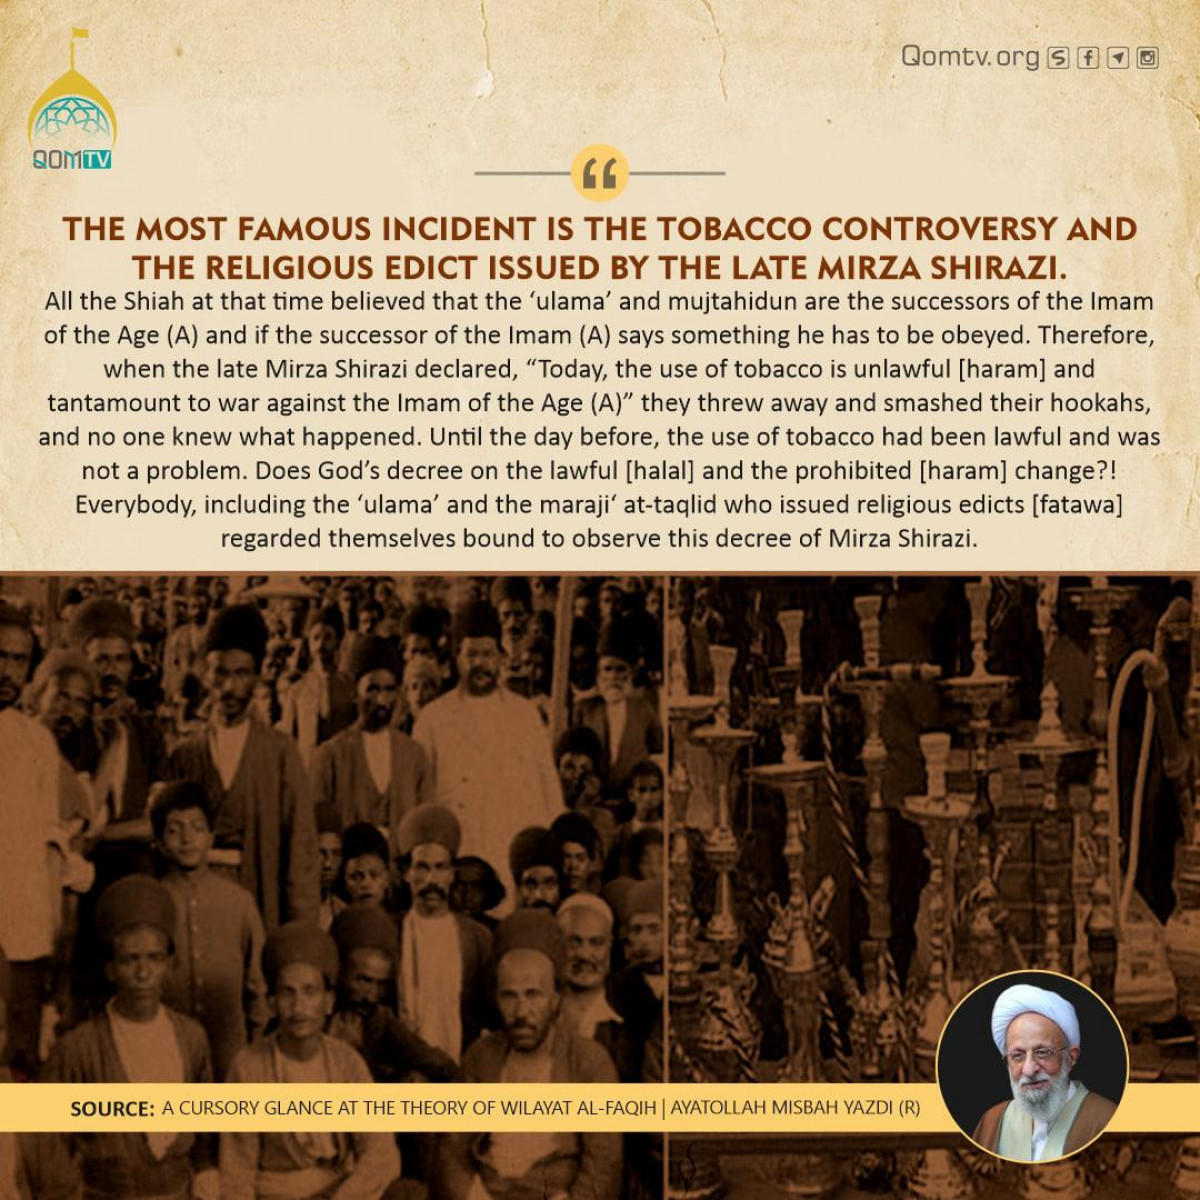 The most famous incident is the tobacco controversy and the religious edict issued by the late Mirza Shirazi